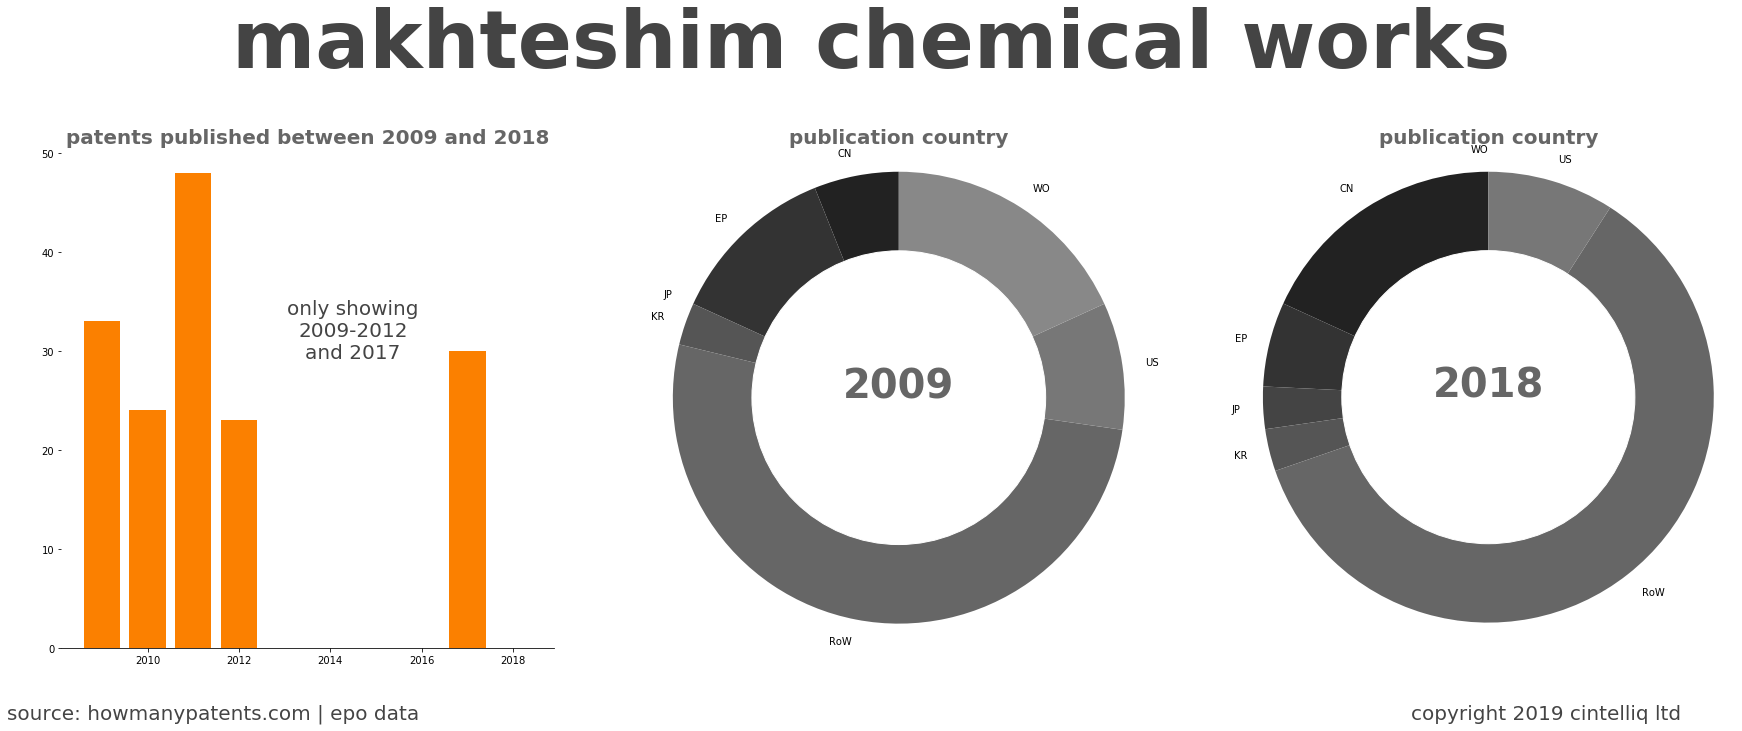 summary of patents for Makhteshim Chemical Works